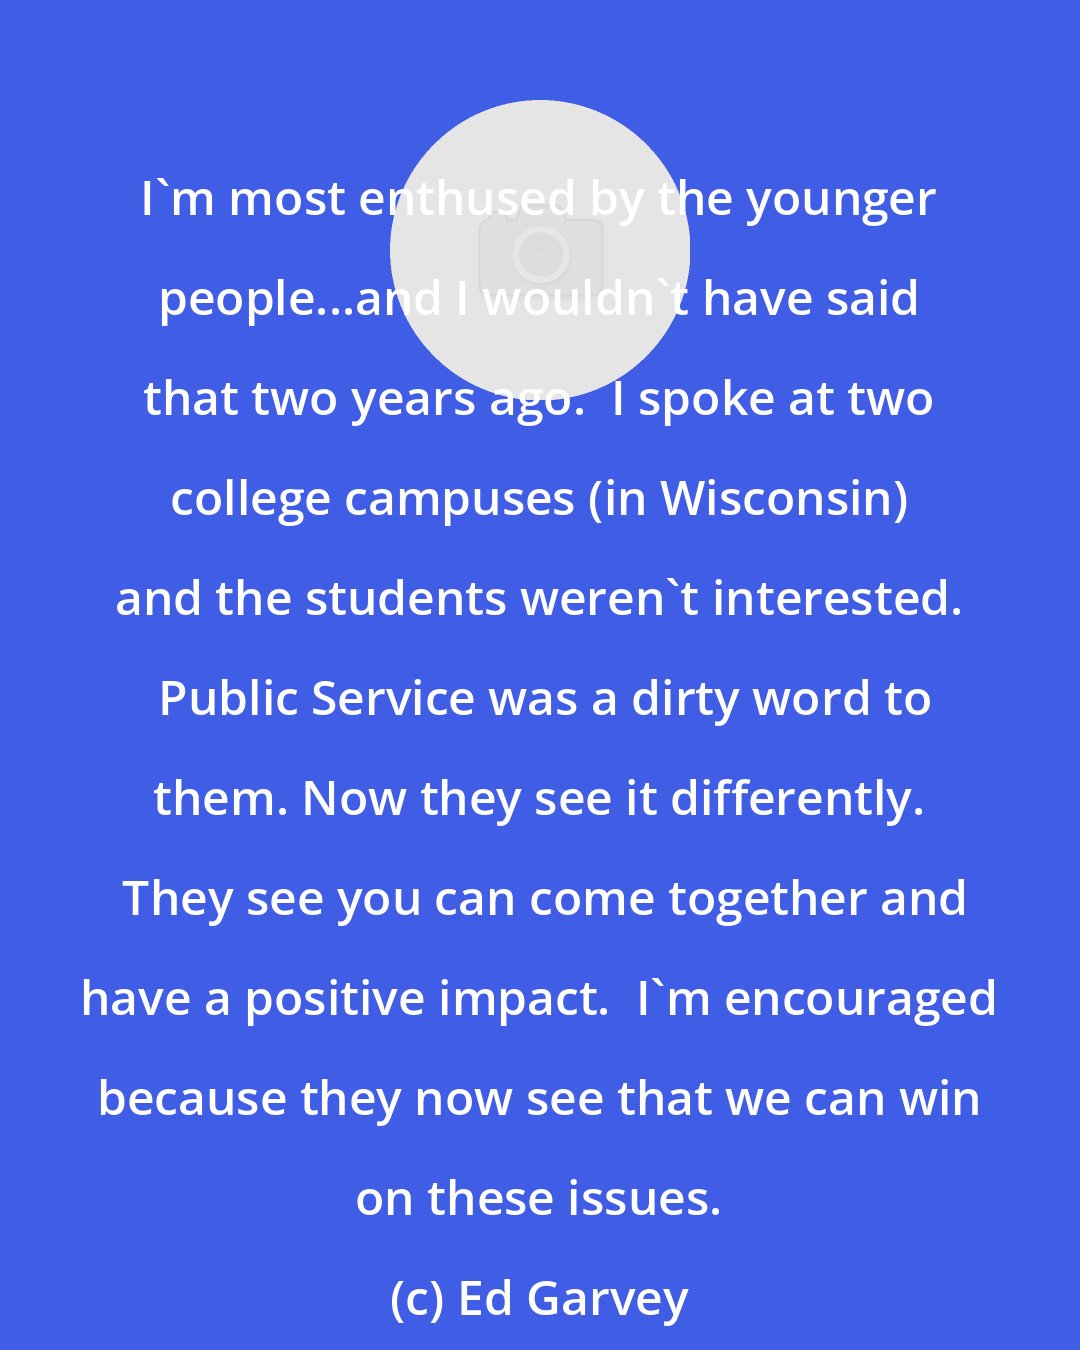 Ed Garvey: I'm most enthused by the younger people...and I wouldn't have said that two years ago.  I spoke at two college campuses (in Wisconsin) and the students weren't interested.  Public Service was a dirty word to them. Now they see it differently.  They see you can come together and have a positive impact.  I'm encouraged because they now see that we can win on these issues.